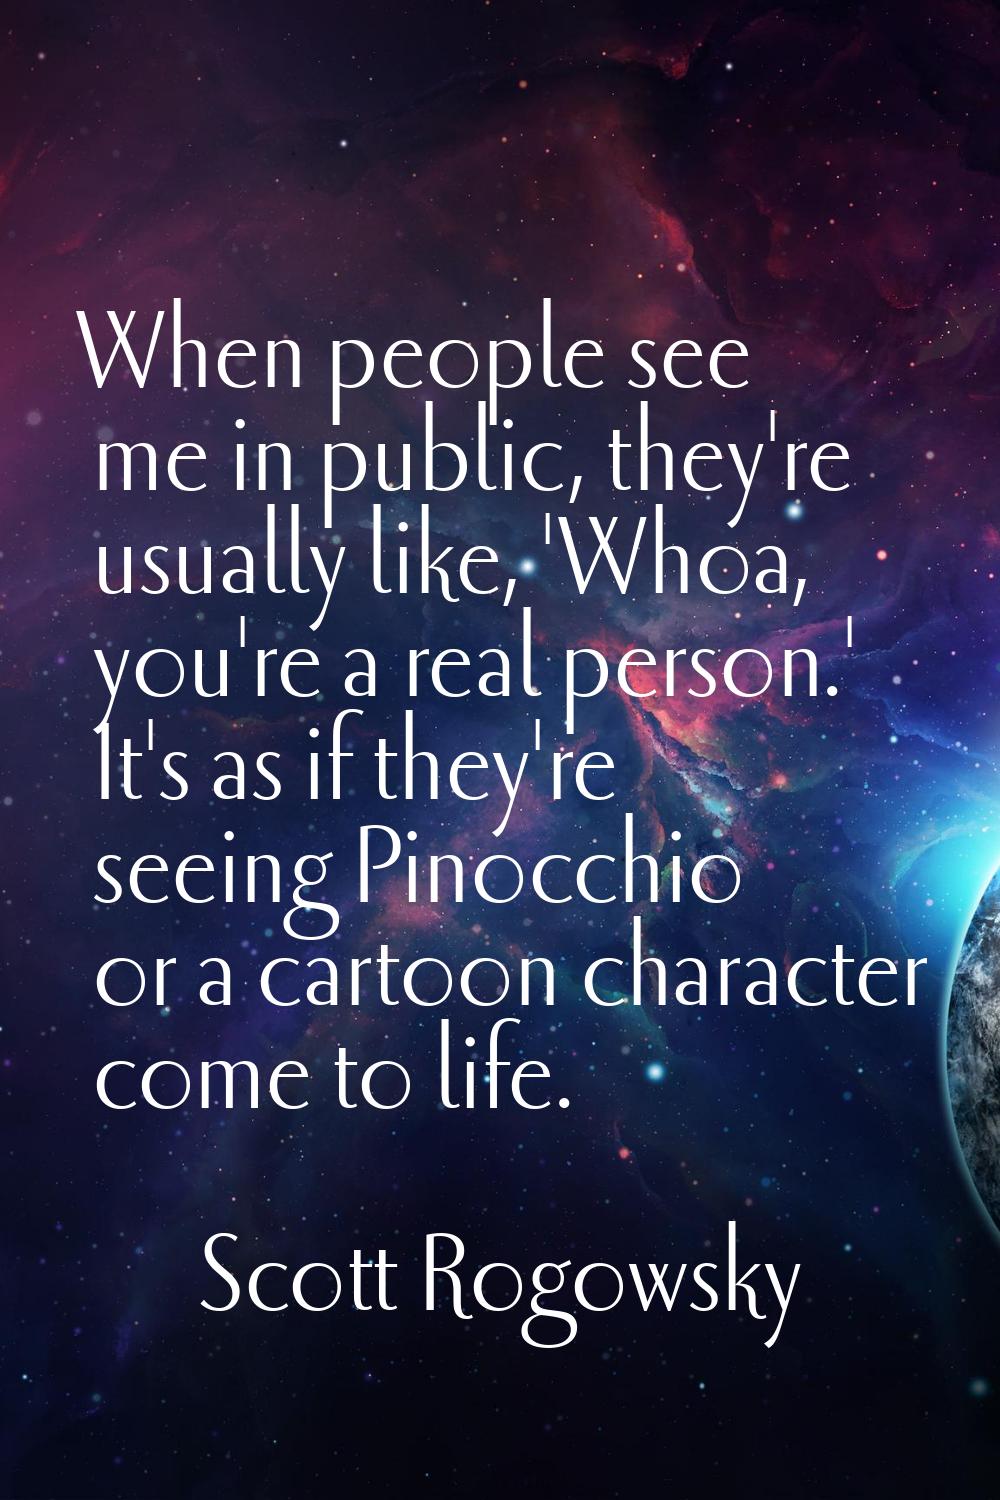 When people see me in public, they're usually like, 'Whoa, you're a real person.' It's as if they'r